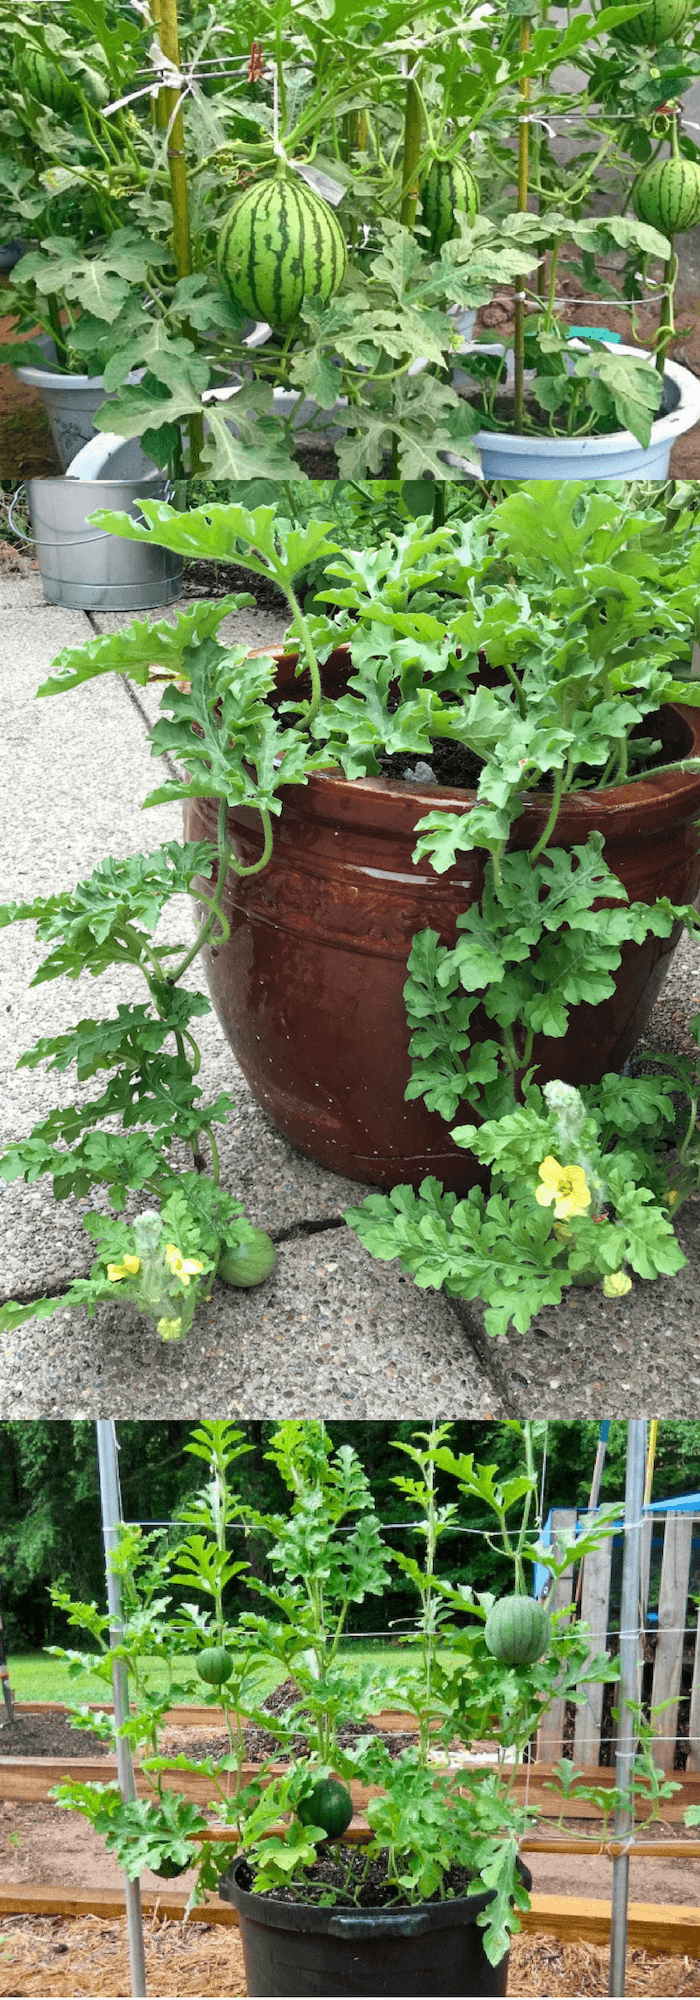 Growing Watermelon in containers